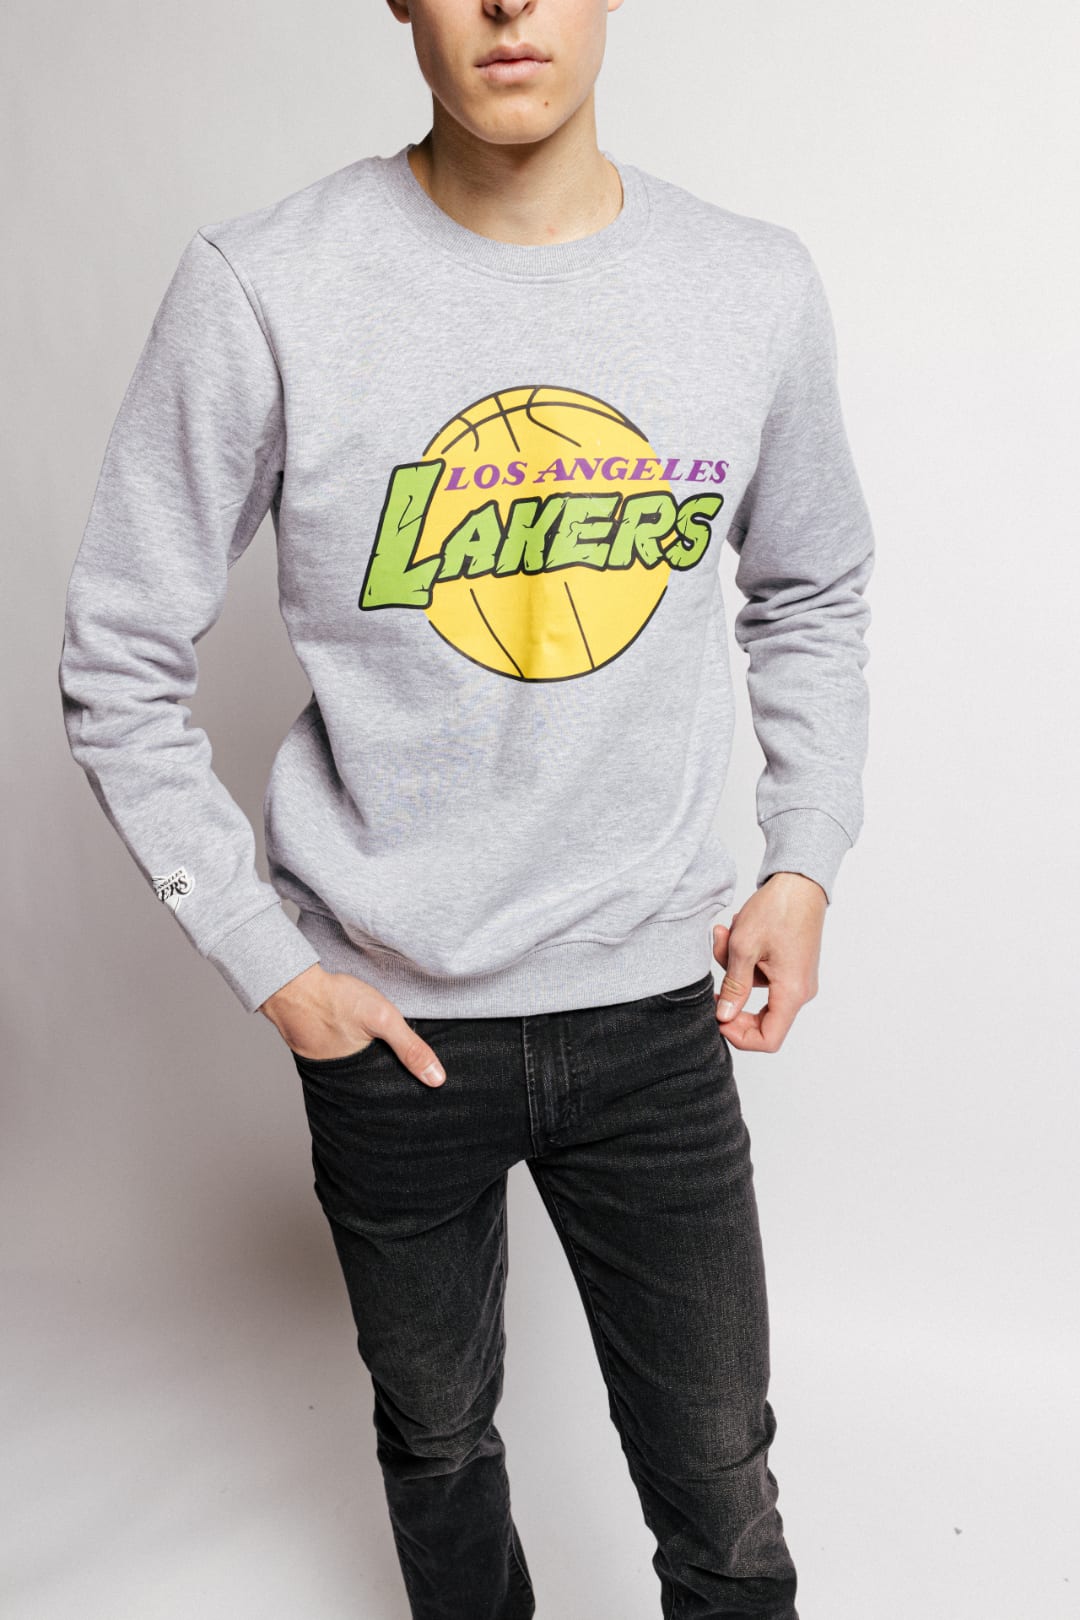 A model wearing a grey crewneck with the Lakers logo in a green TMNT font.